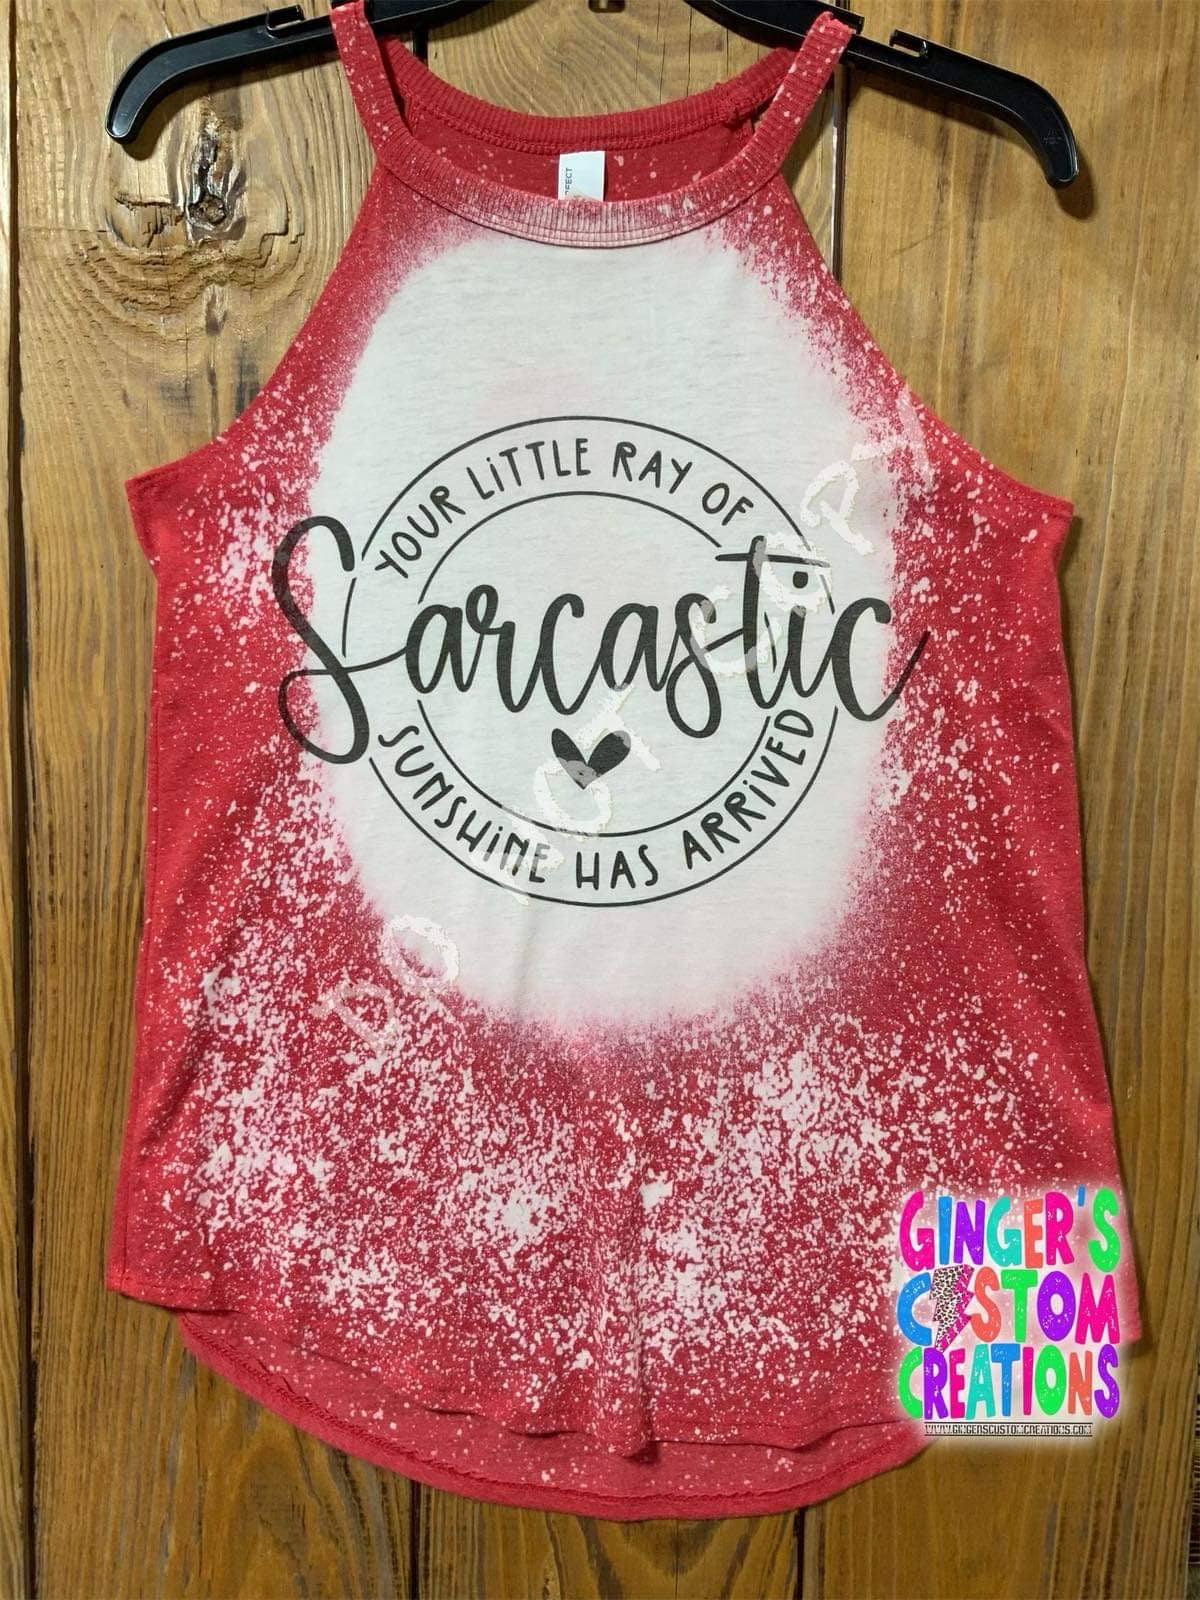 Your little ray of sarcastic sunshine has arrived BLEACHED TANK TOP